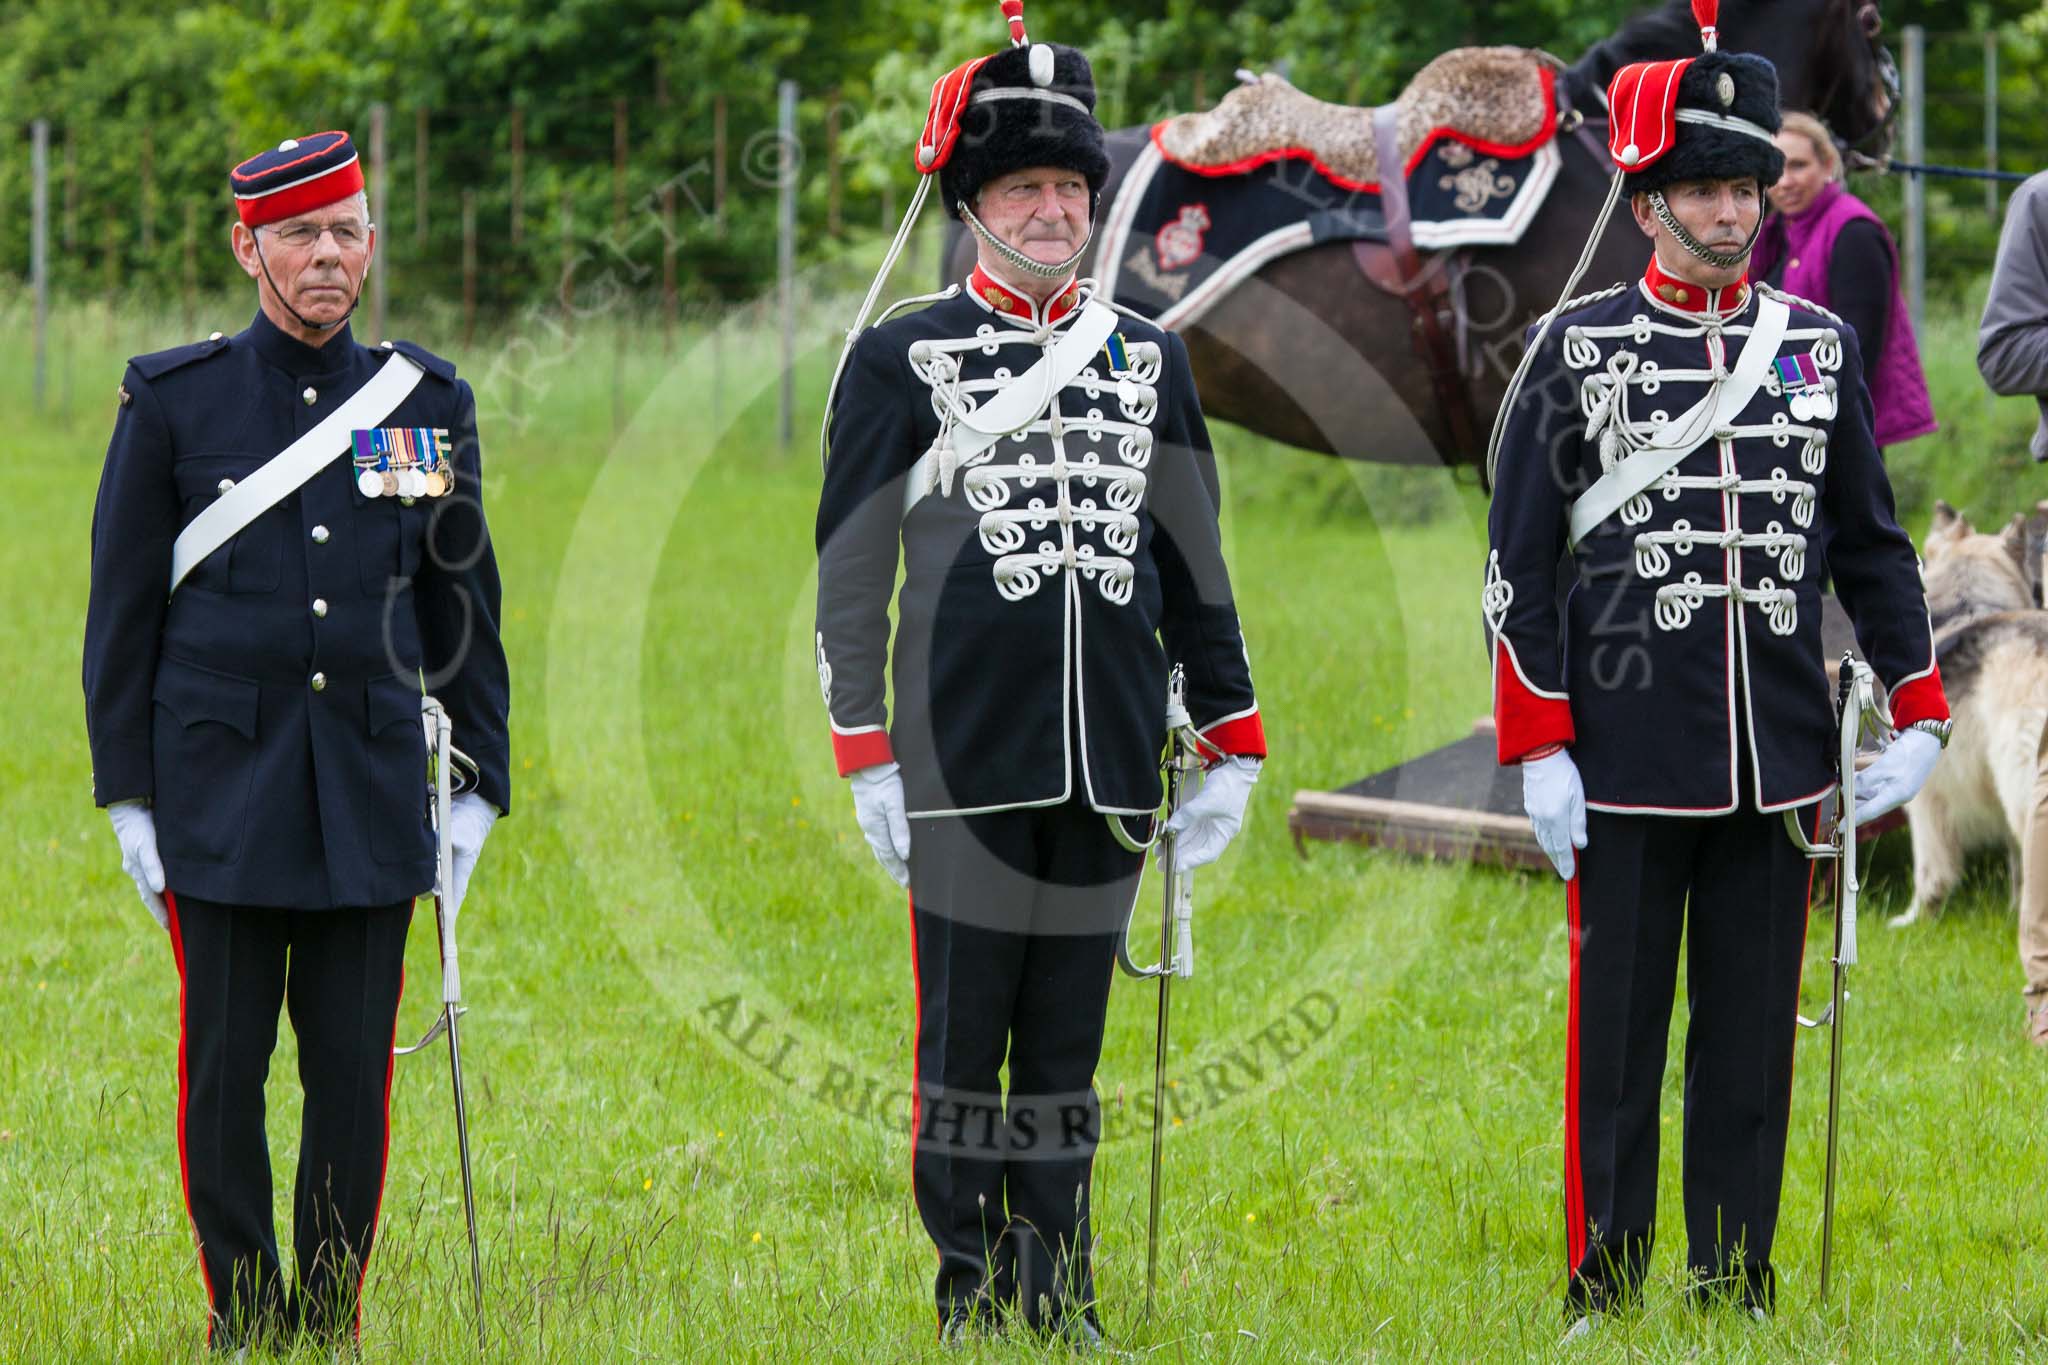 The Light Cavalry HAC Annual Review and Inspection 2013.
Windsor Great Park Review Ground,
Windsor,
Berkshire,
United Kingdom,
on 09 June 2013 at 12:30, image #199